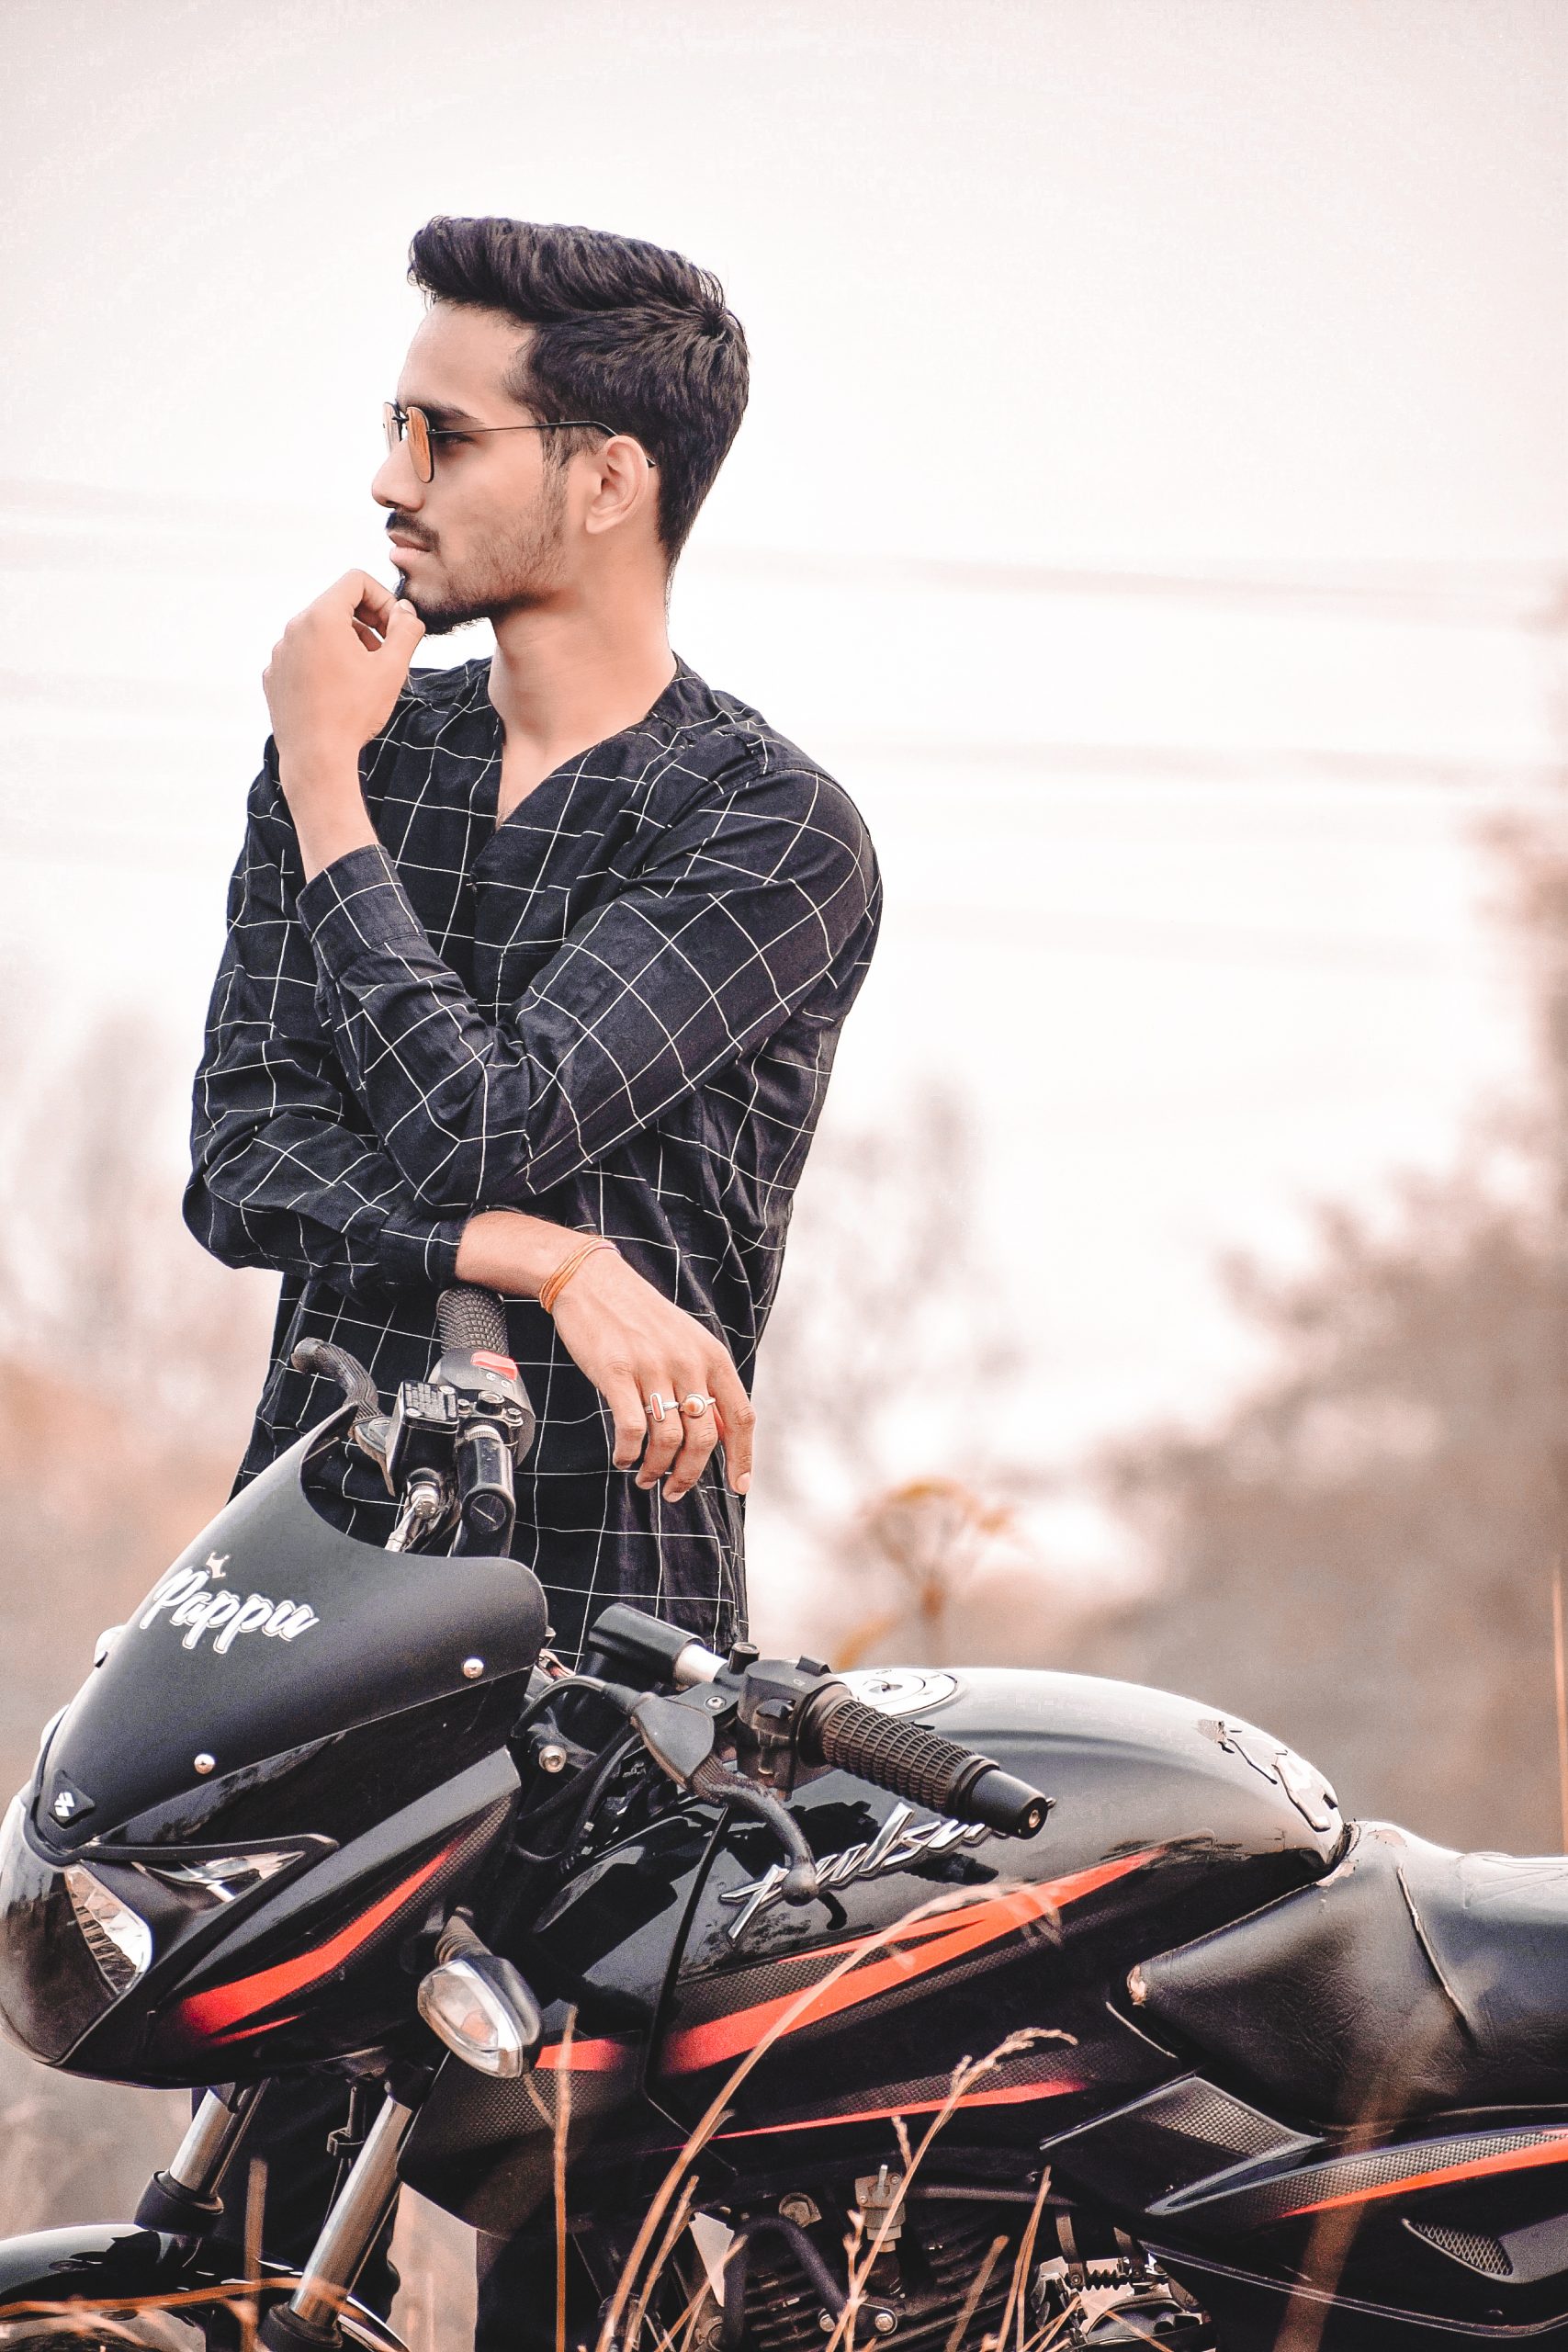 38 Young Man On Royal Enfield Images, Stock Photos & Vectors | Shutterstock